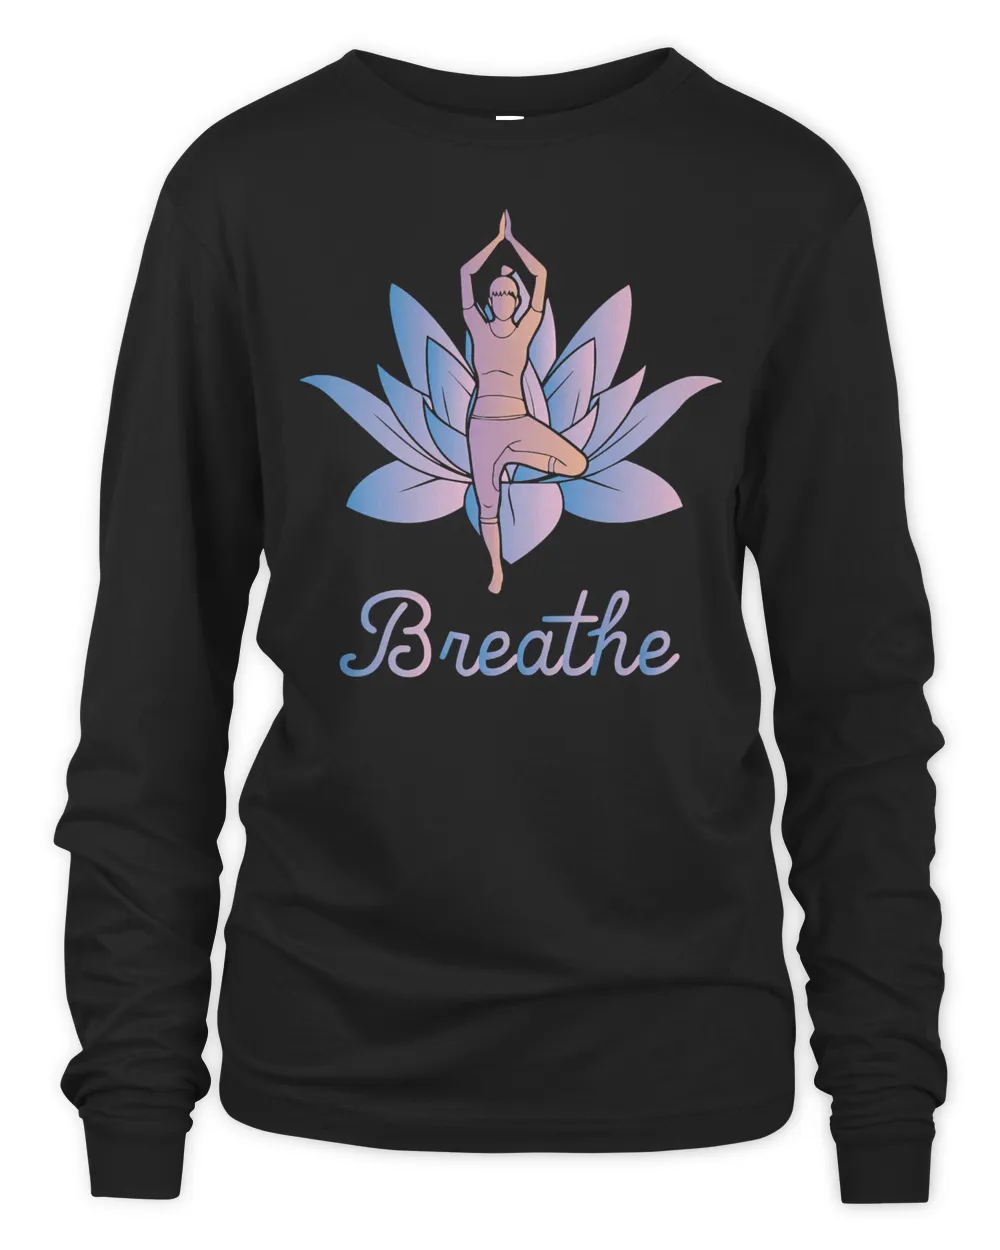 Yoga Fitness When In Doubt Breathe It Out Meditation instructor52 Bodybuilding